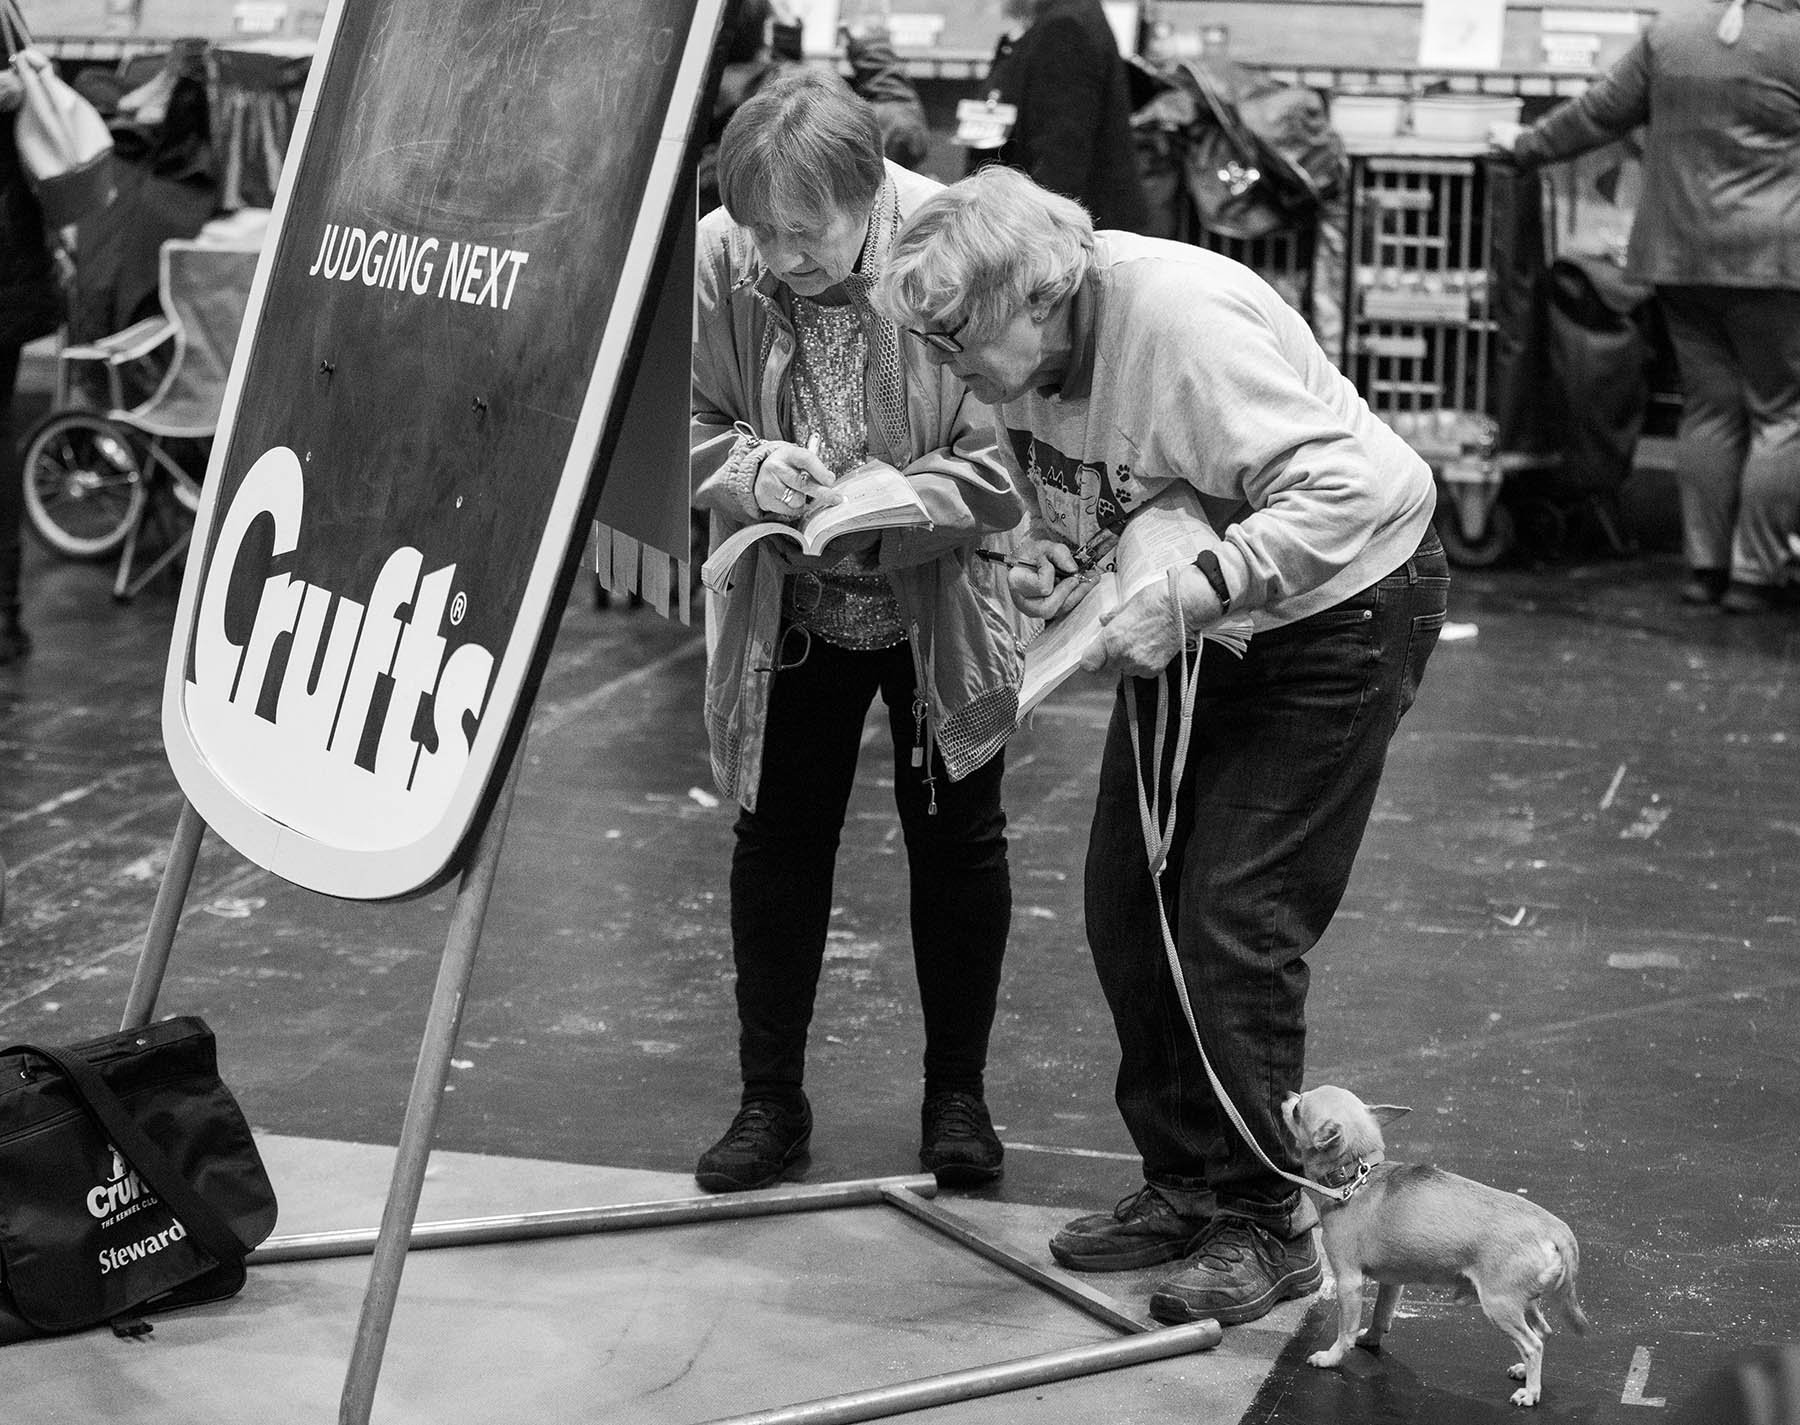  Crufts, the largest dog show in the world, takes place every March in Birmingham, UK. 